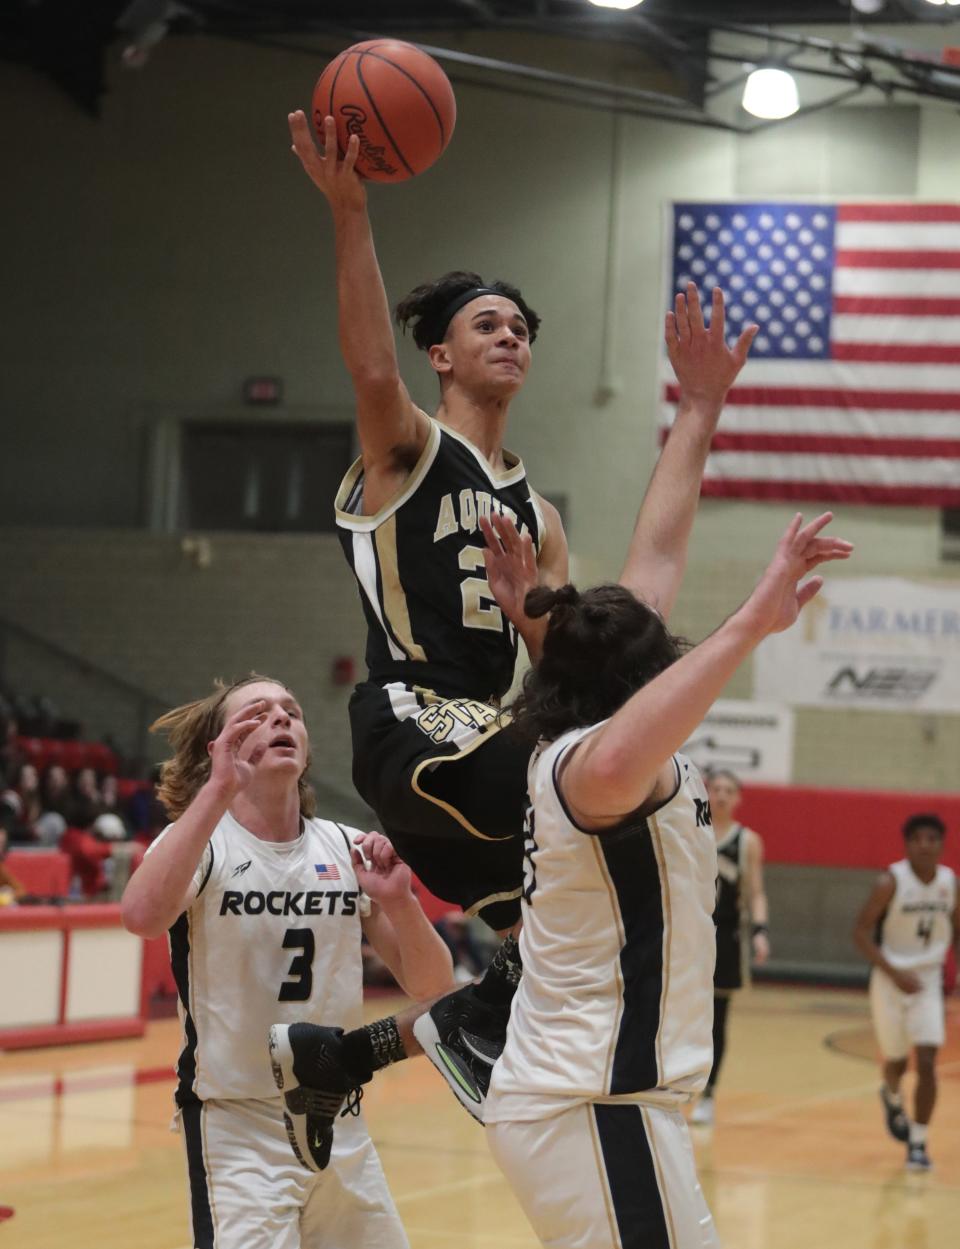 St. Thomas Aquinas' Julius Kimbrough drives for a shot against Lowellville in a boys Division IV district final at Struthers on Friday, March 4, 2022.